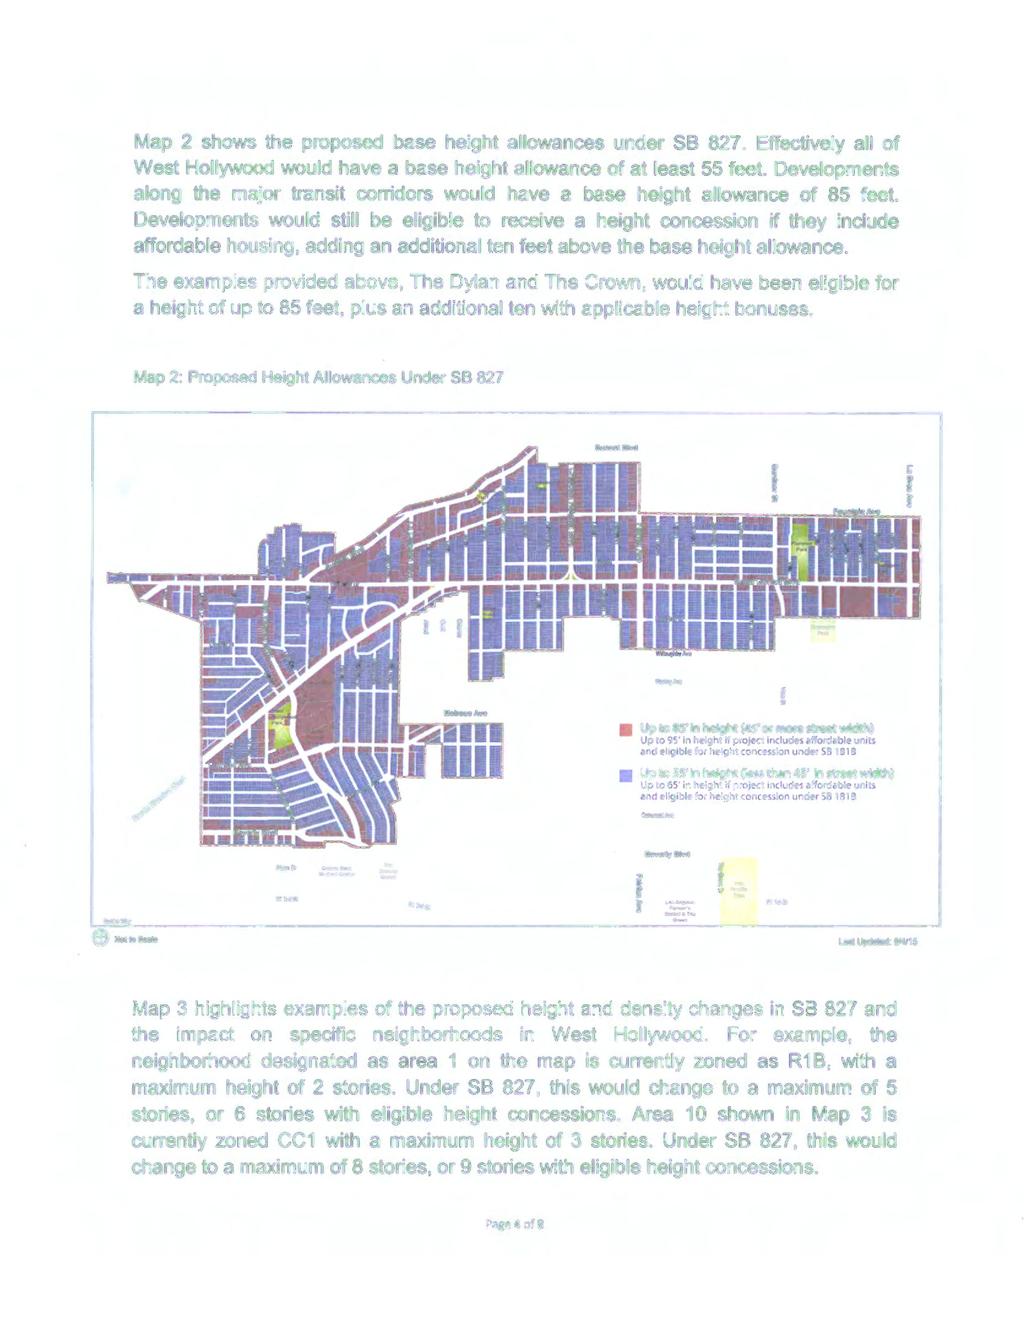 Map 2 shows the proposed base height allowances under SB 827. Effectively all of West Hollywood would have a base height allowance of at least 55 feet.